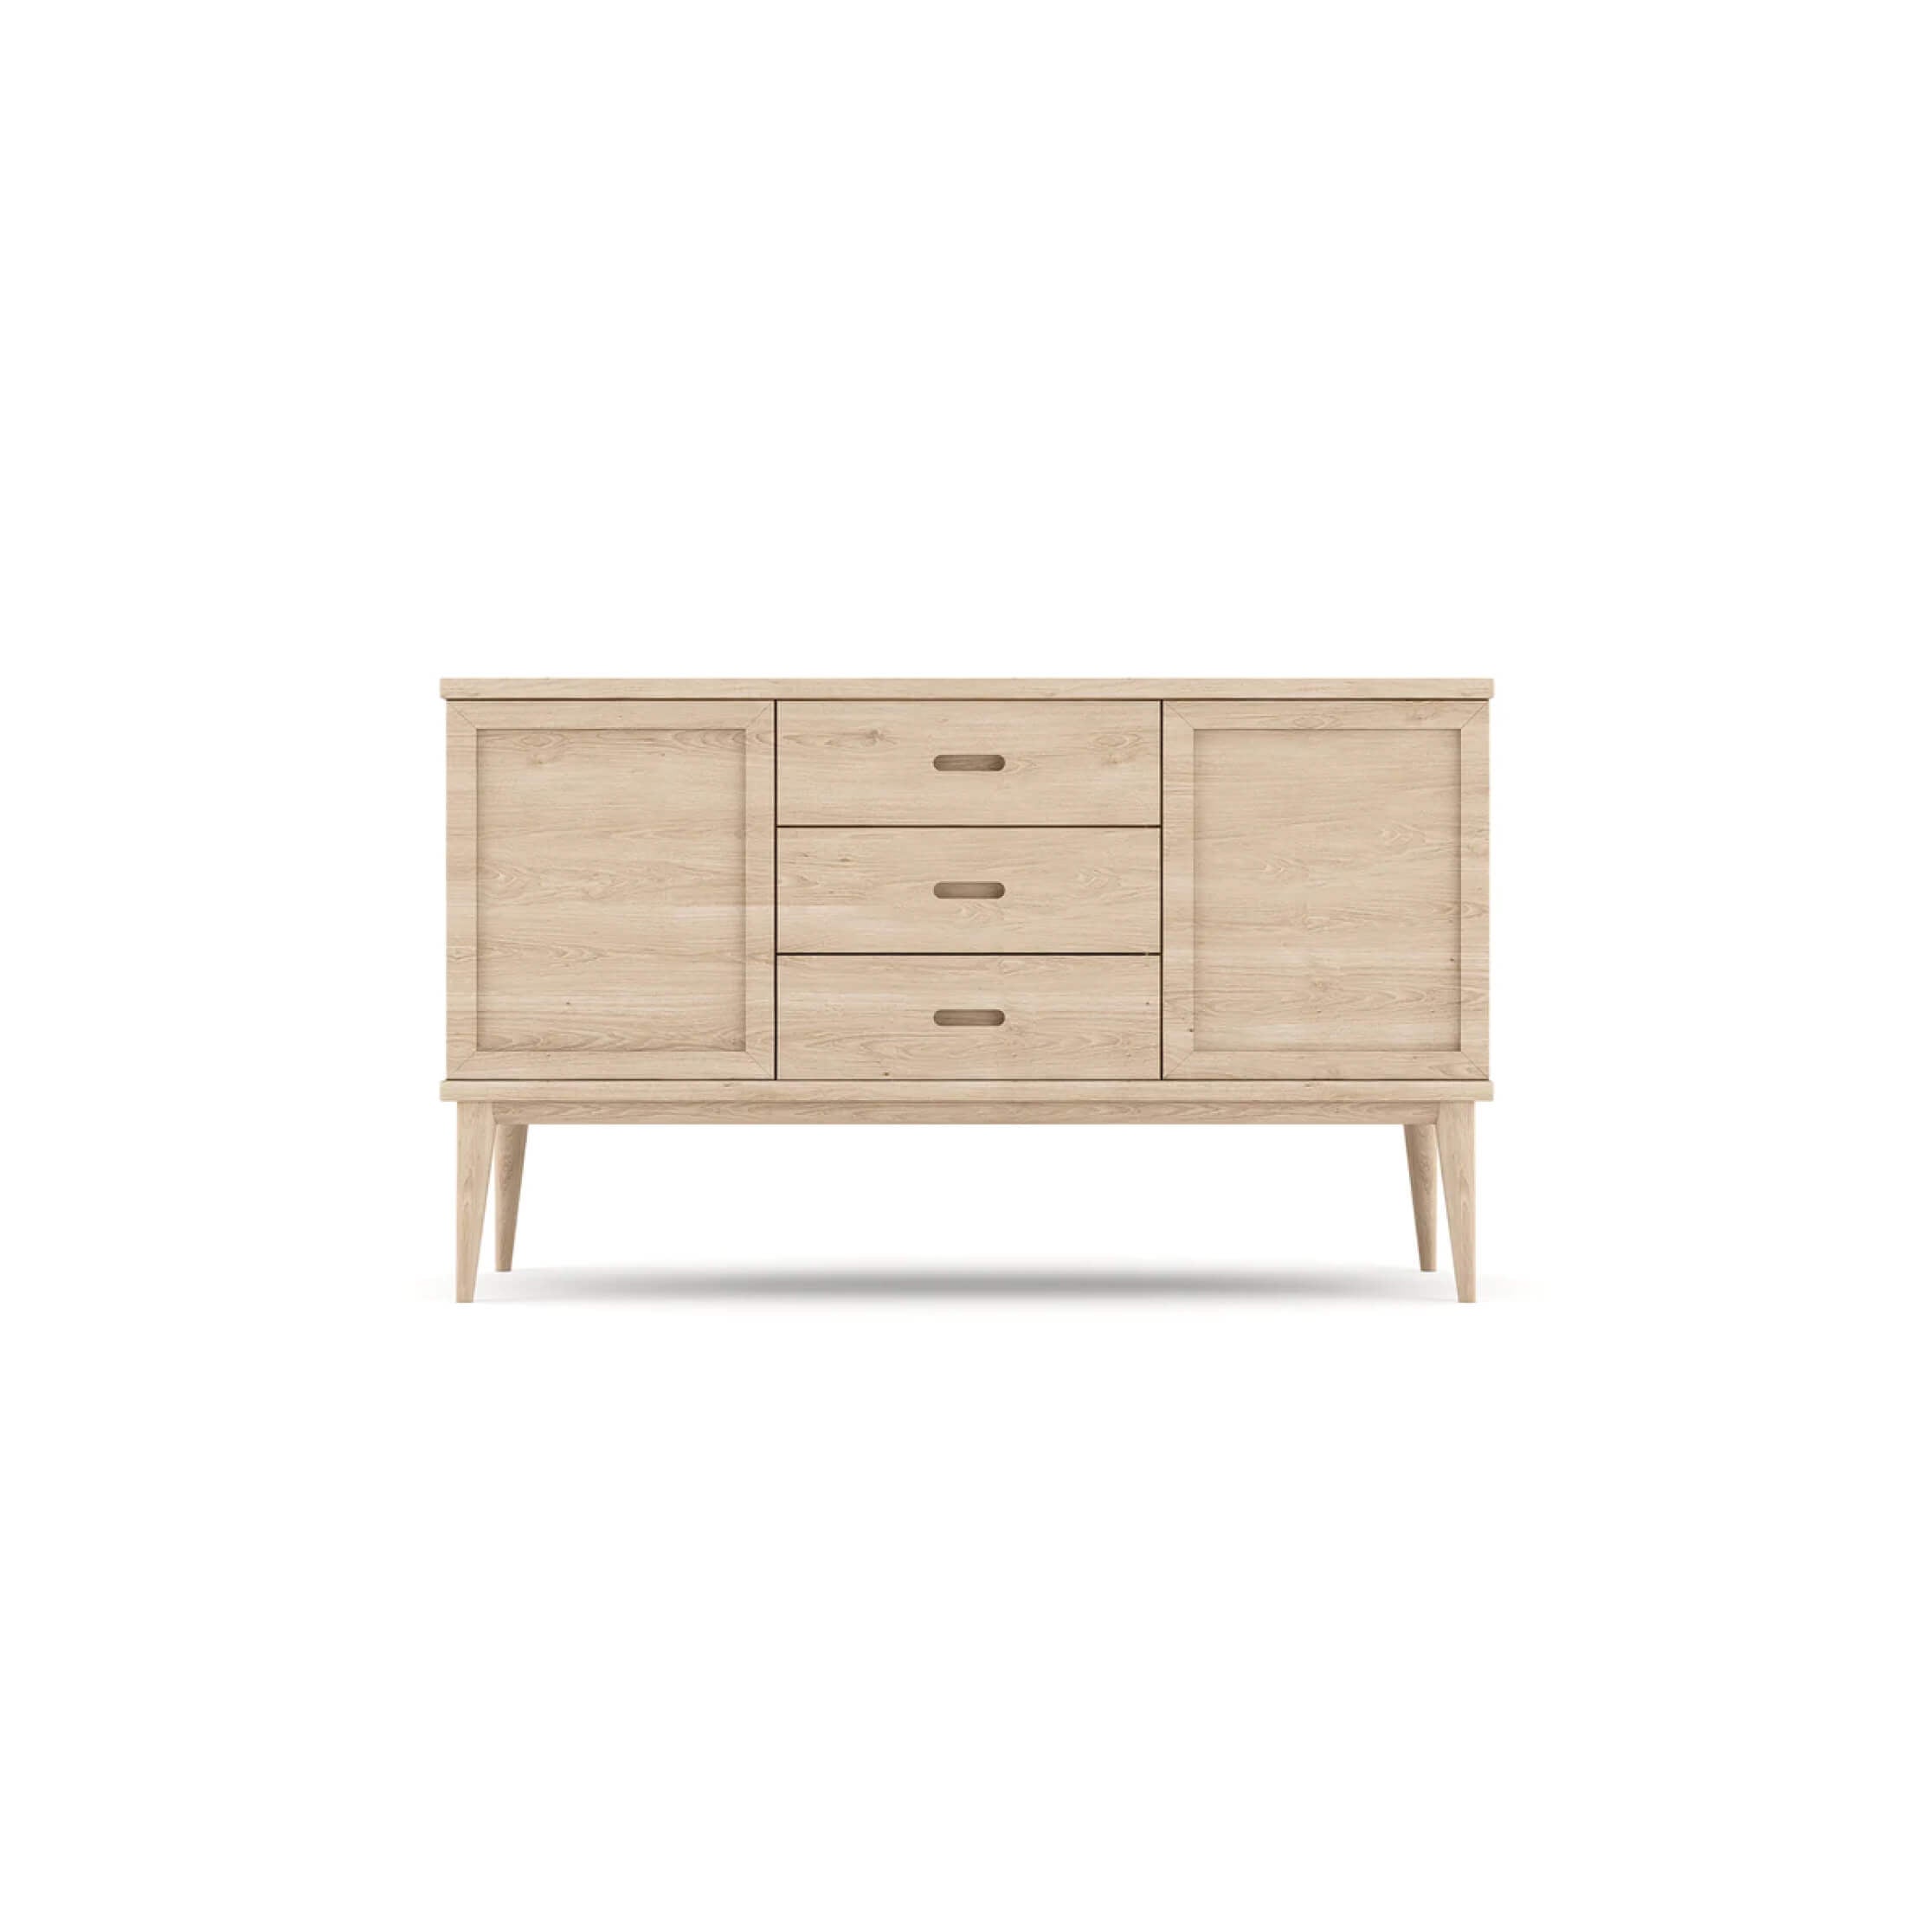 Harrison Credenza from Medley